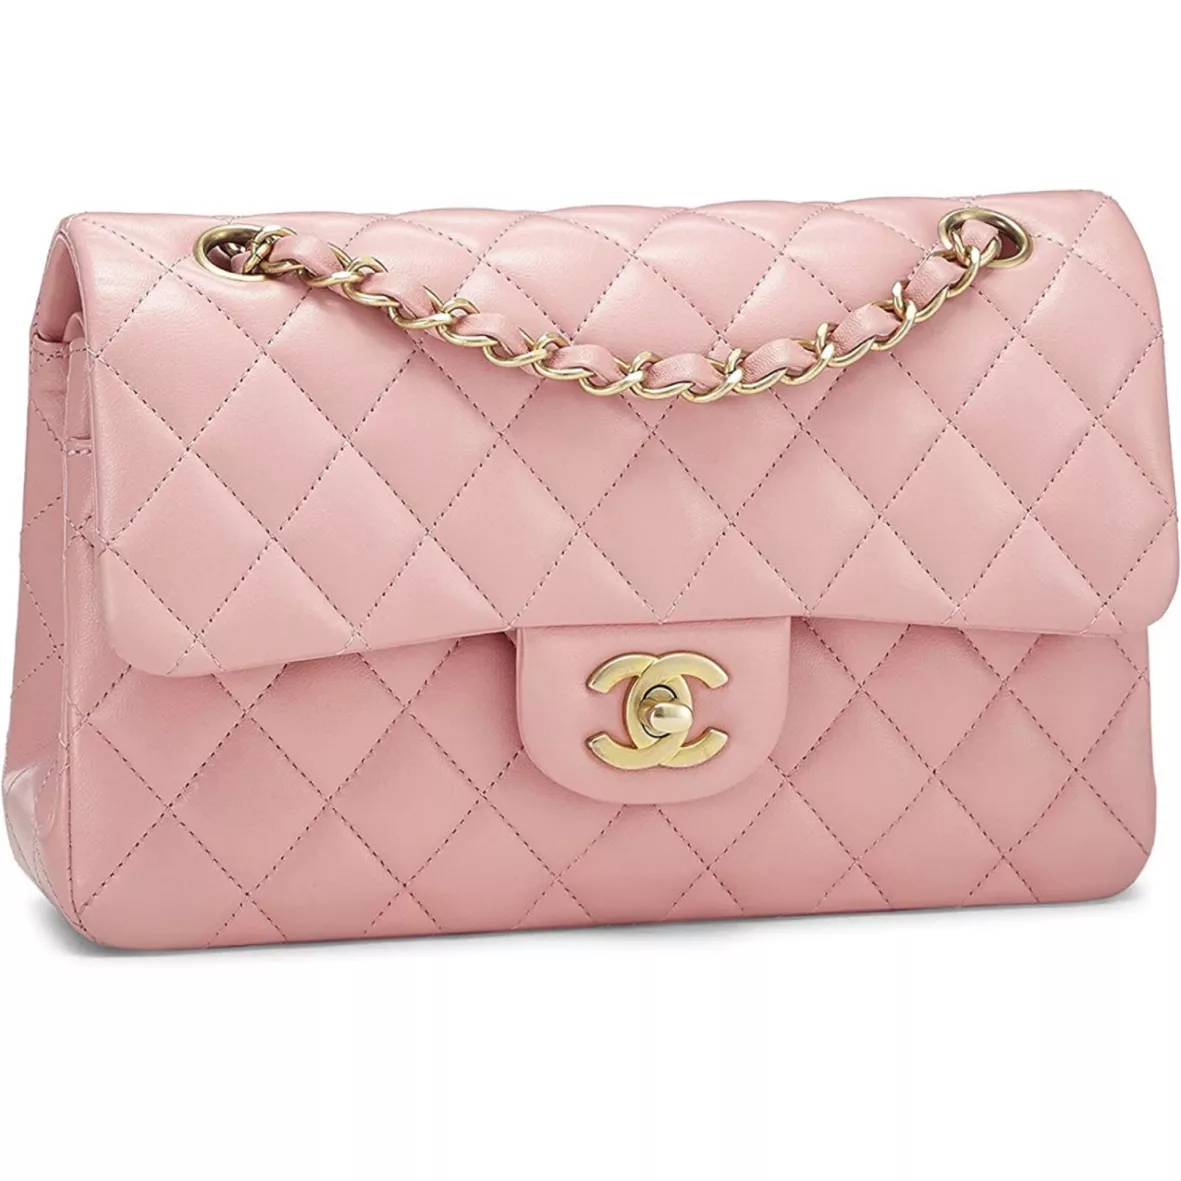 foryou #bags #luxury #chanel do you want one?, gifts for her